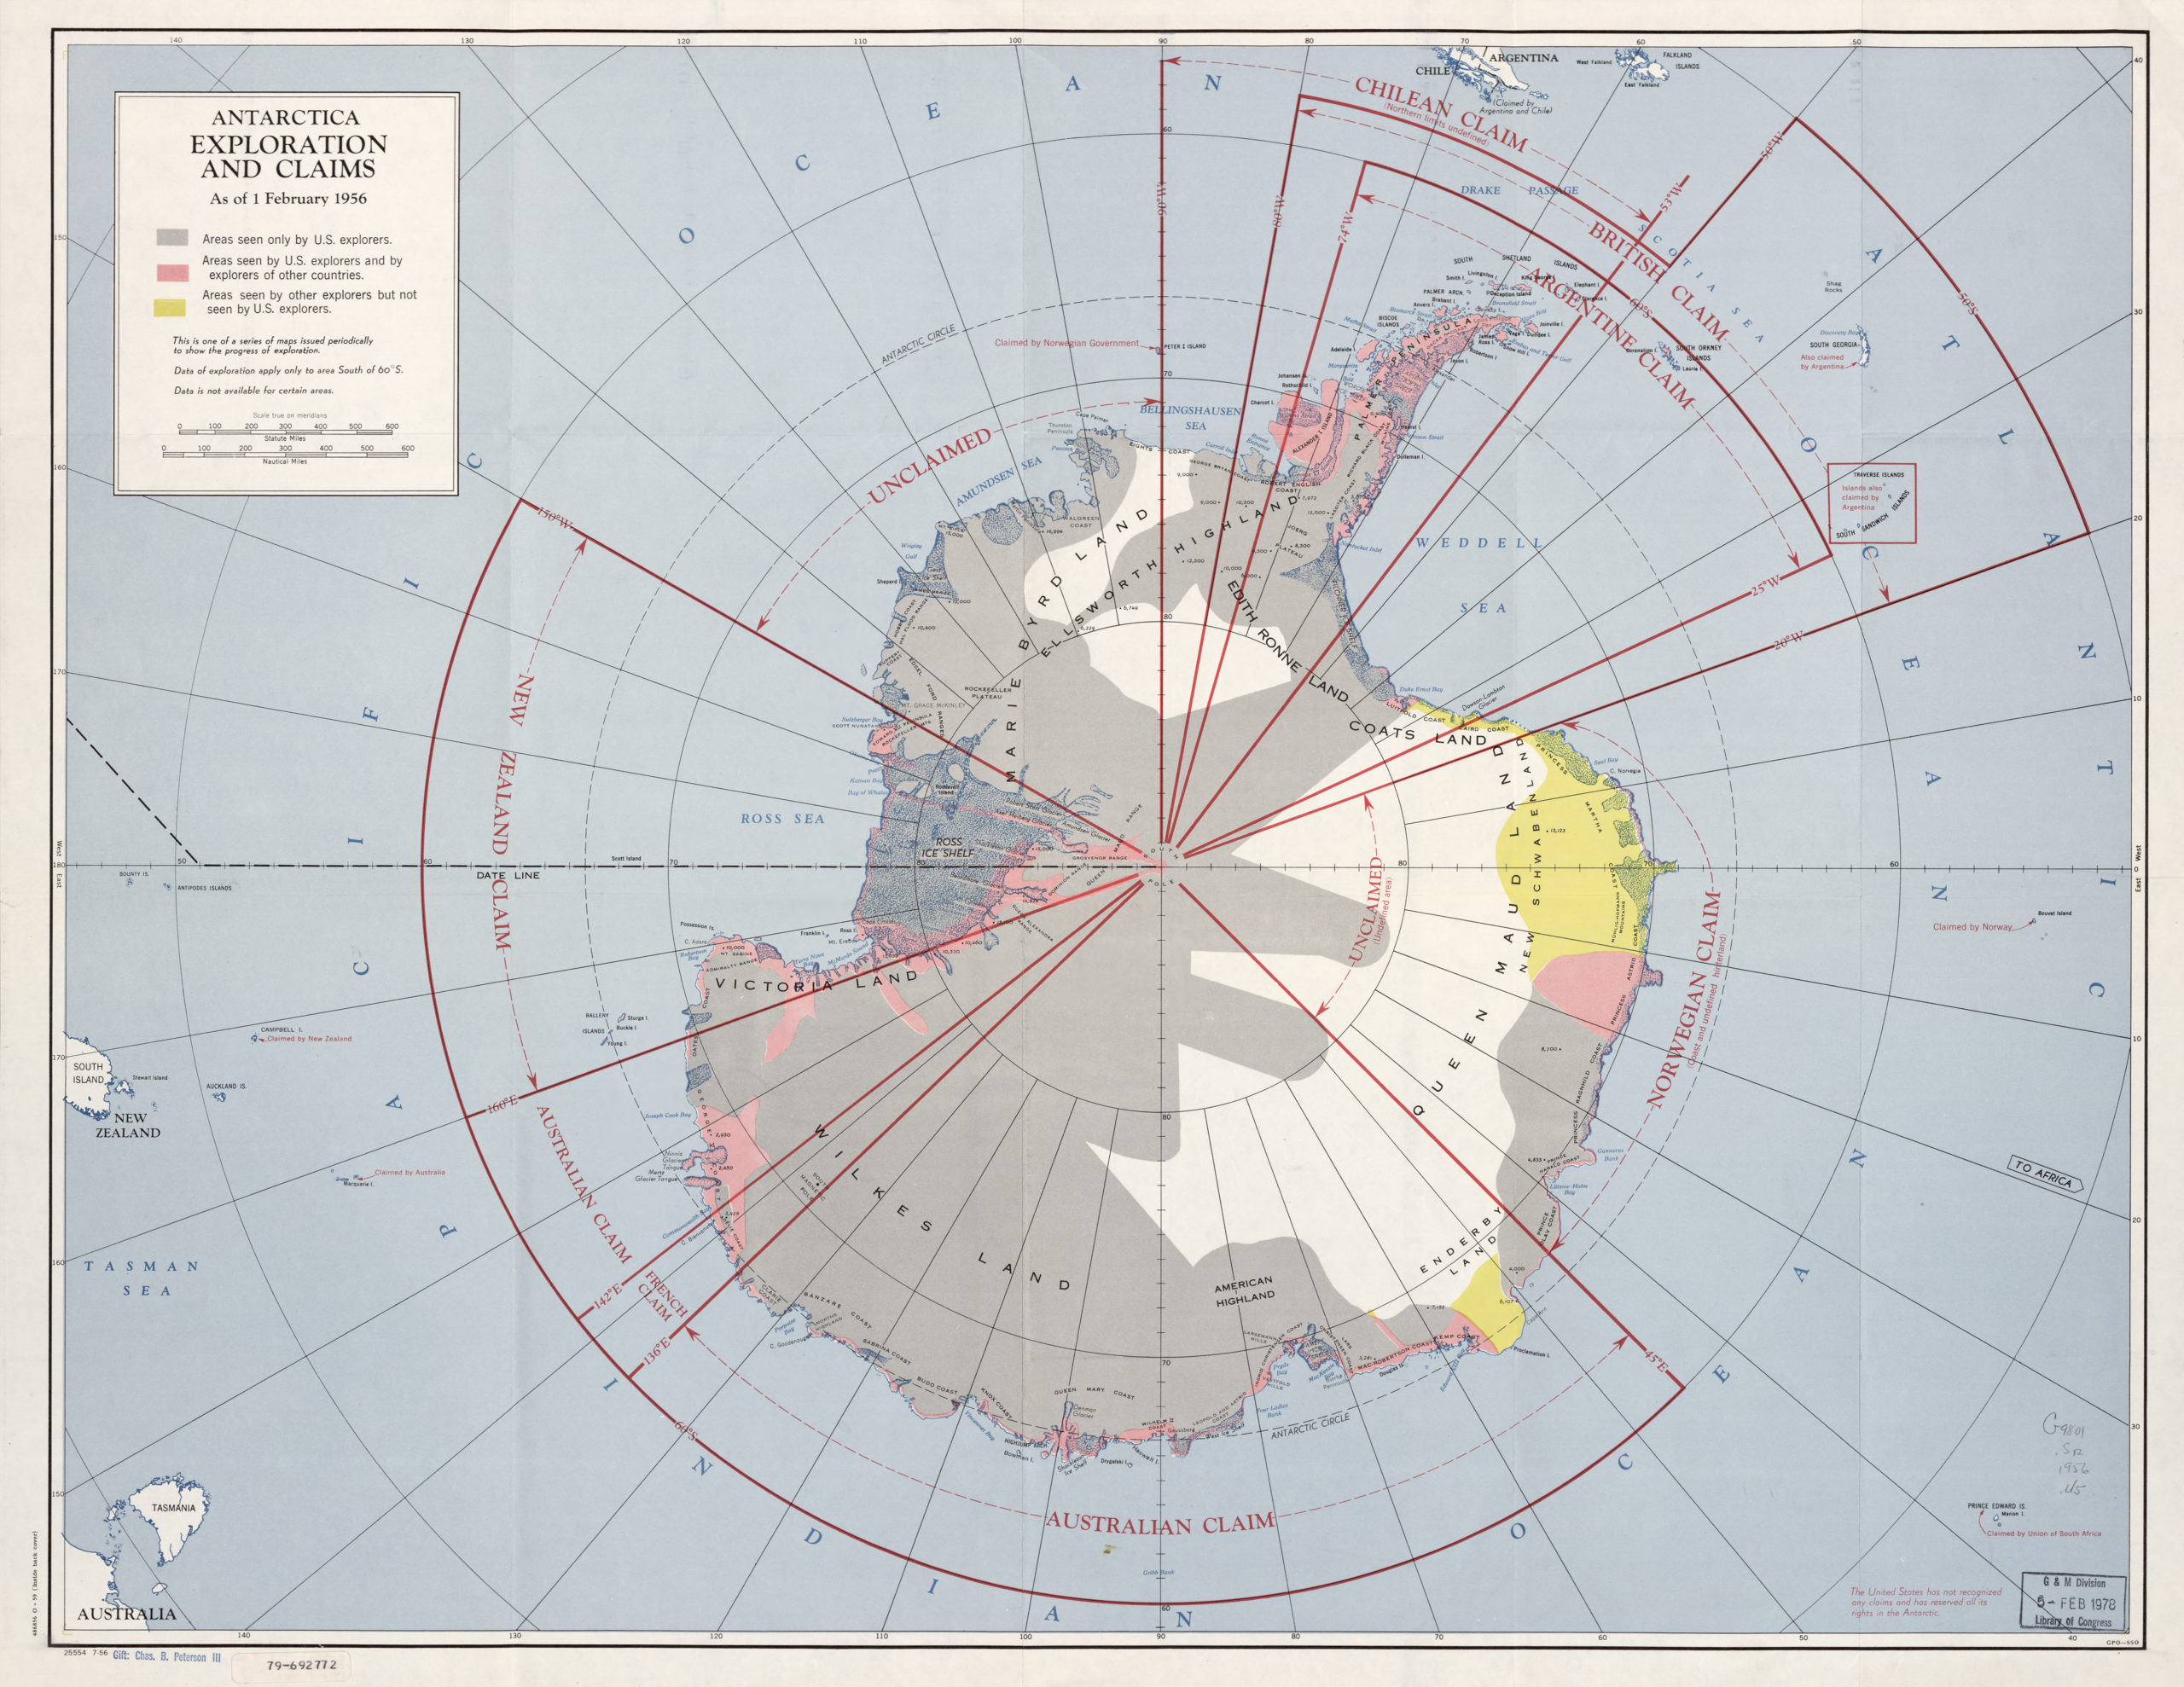 cia-cartography-centre-exploration-of-antarctica-map-geoawesomeness